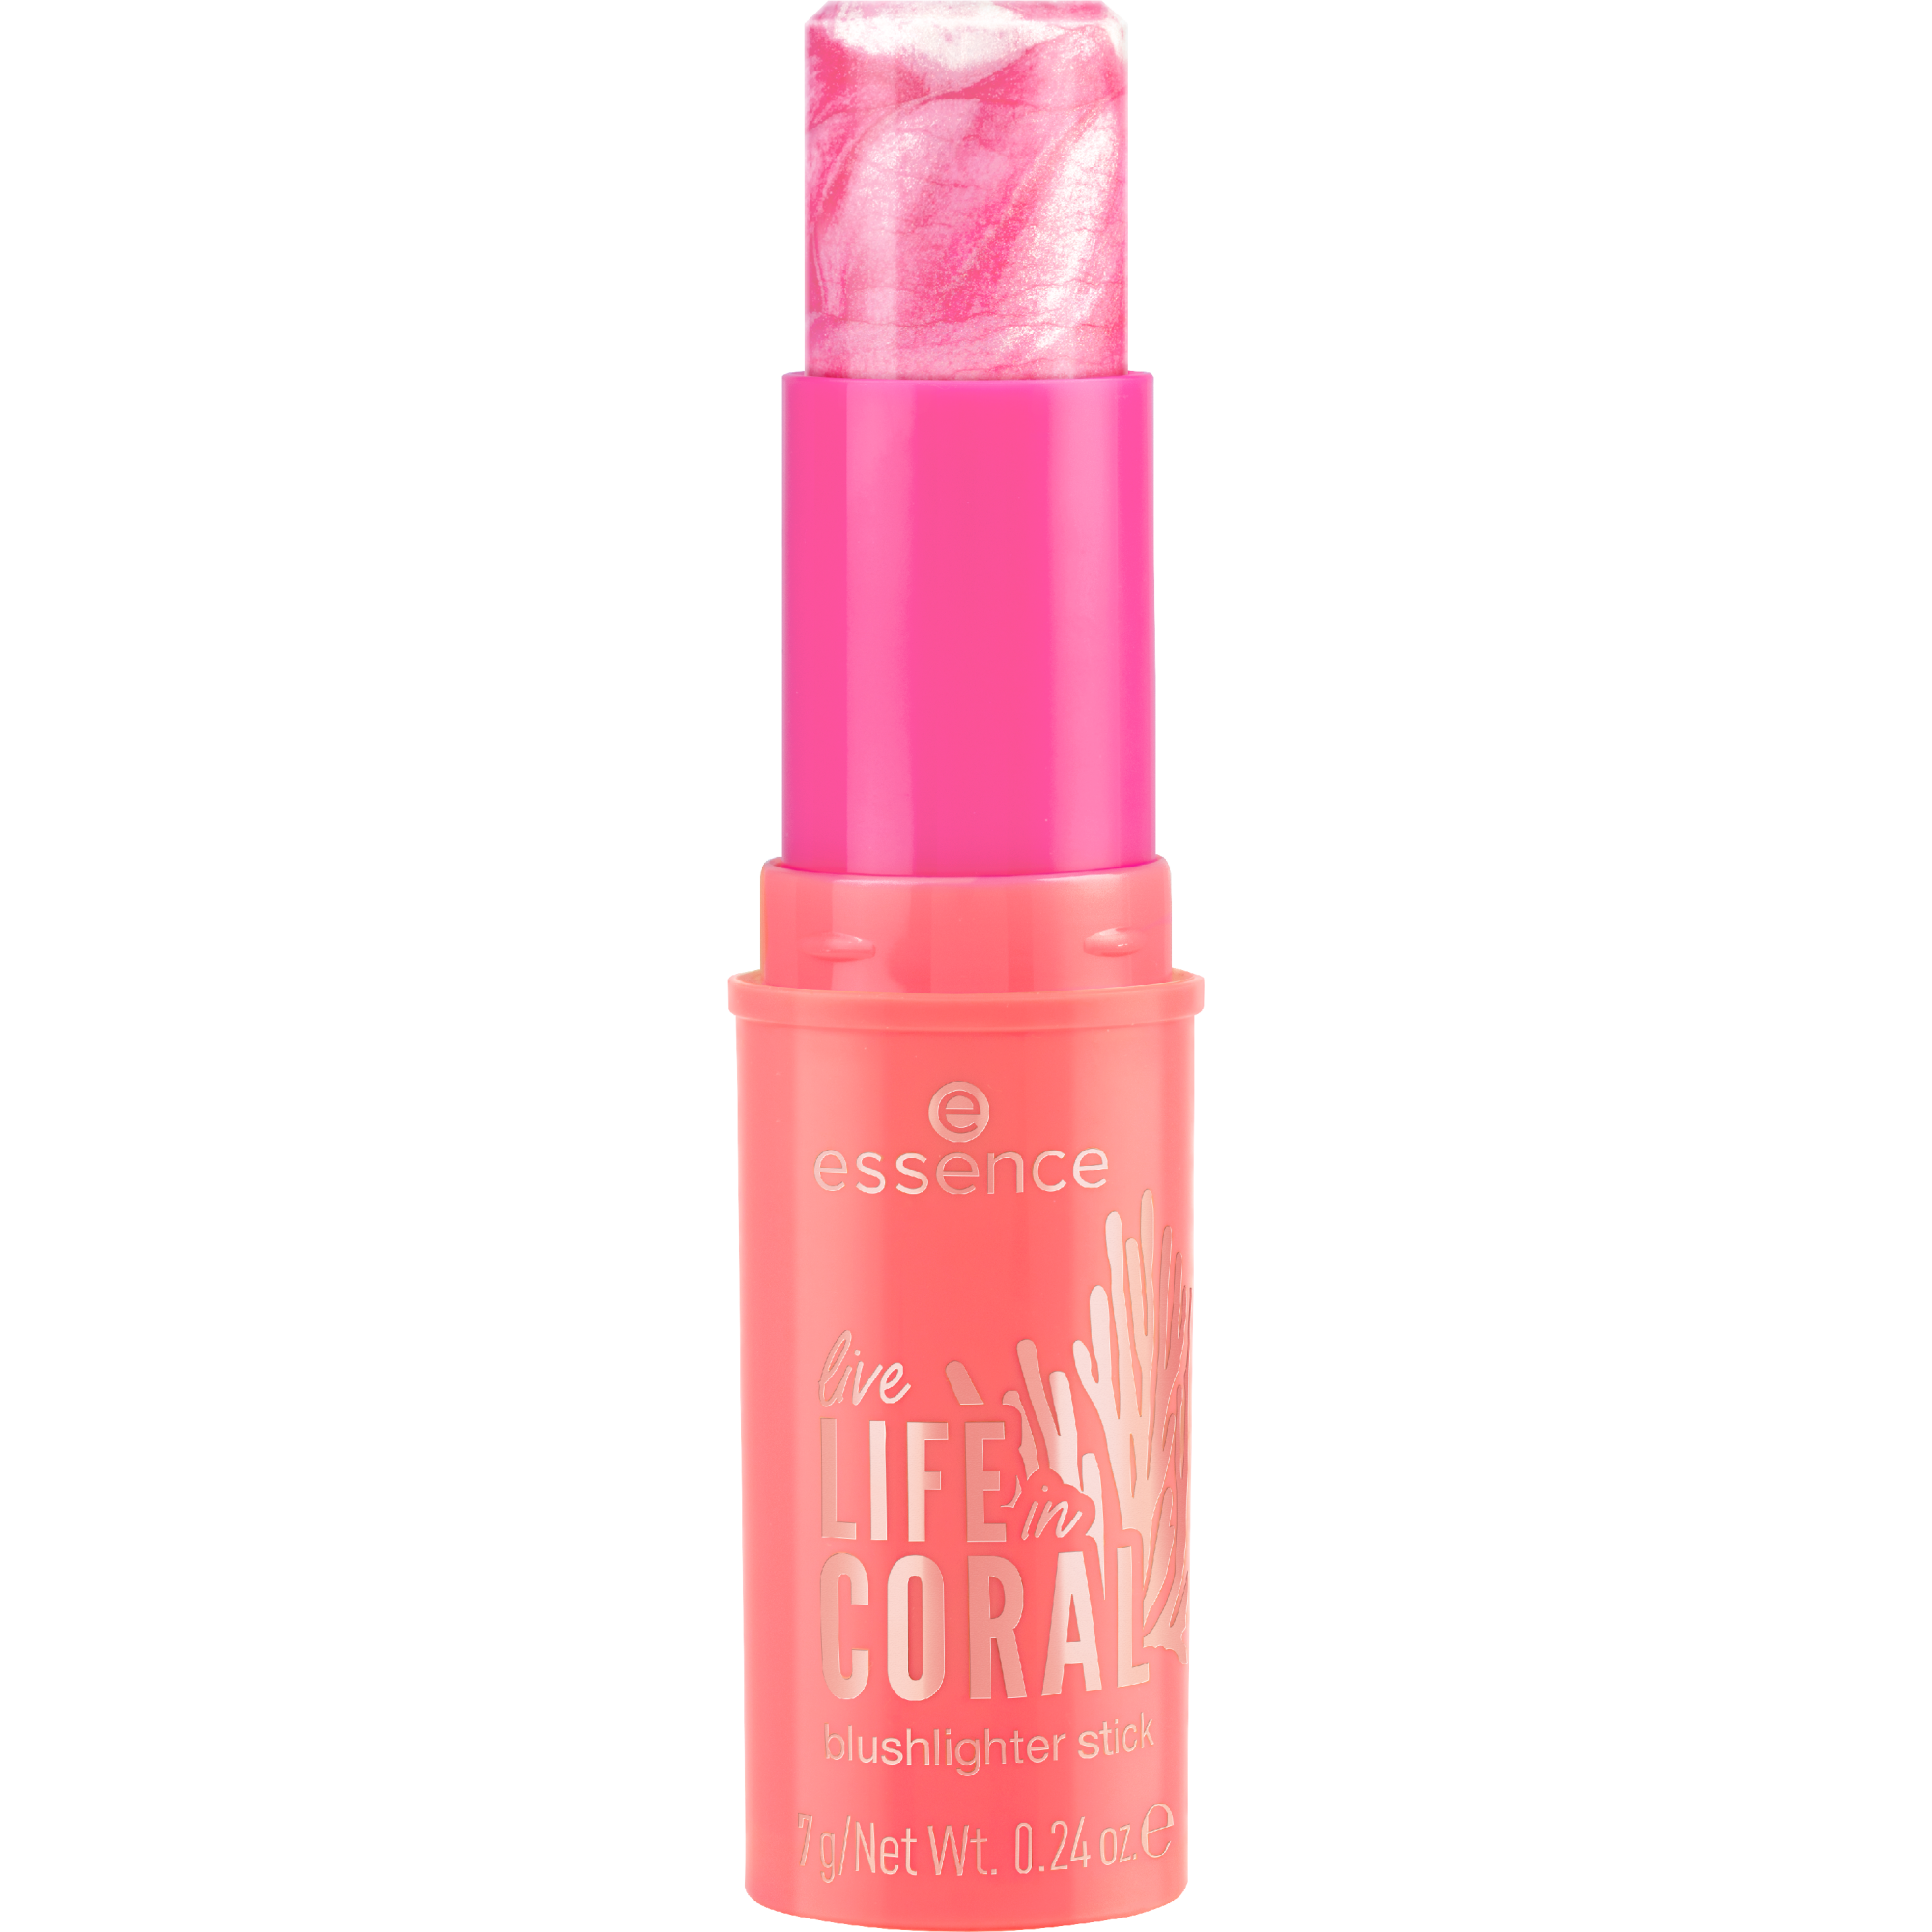 live LIFE in CORAL blushlighter in stick